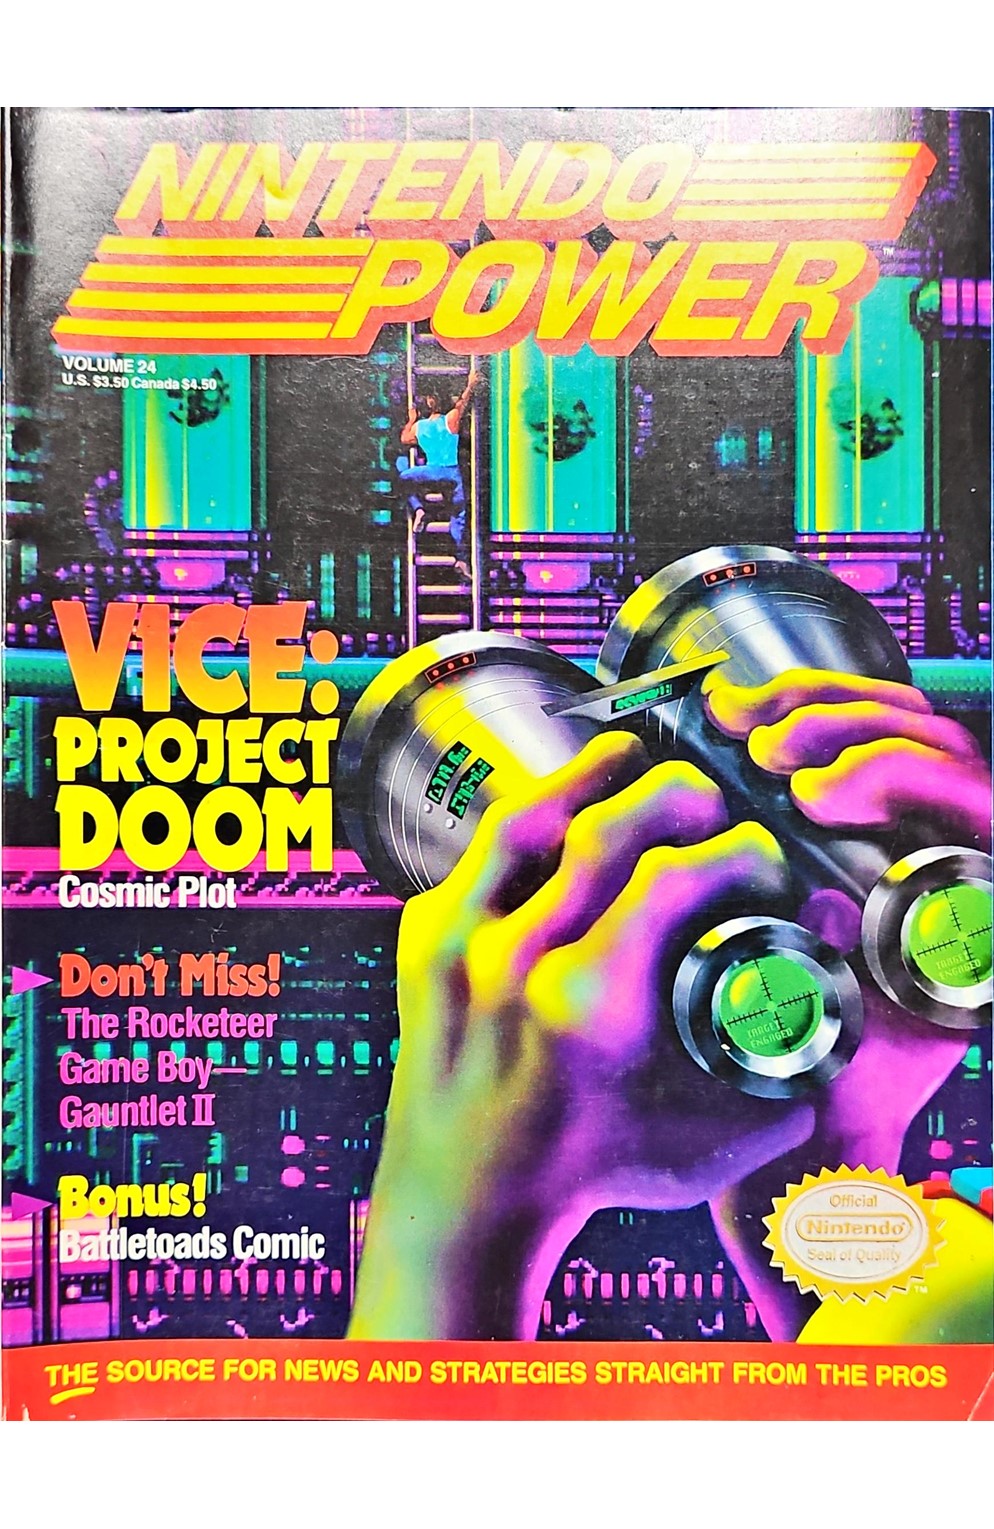 Nintendo Power Volume 24 Vice: Project Doom With Poster